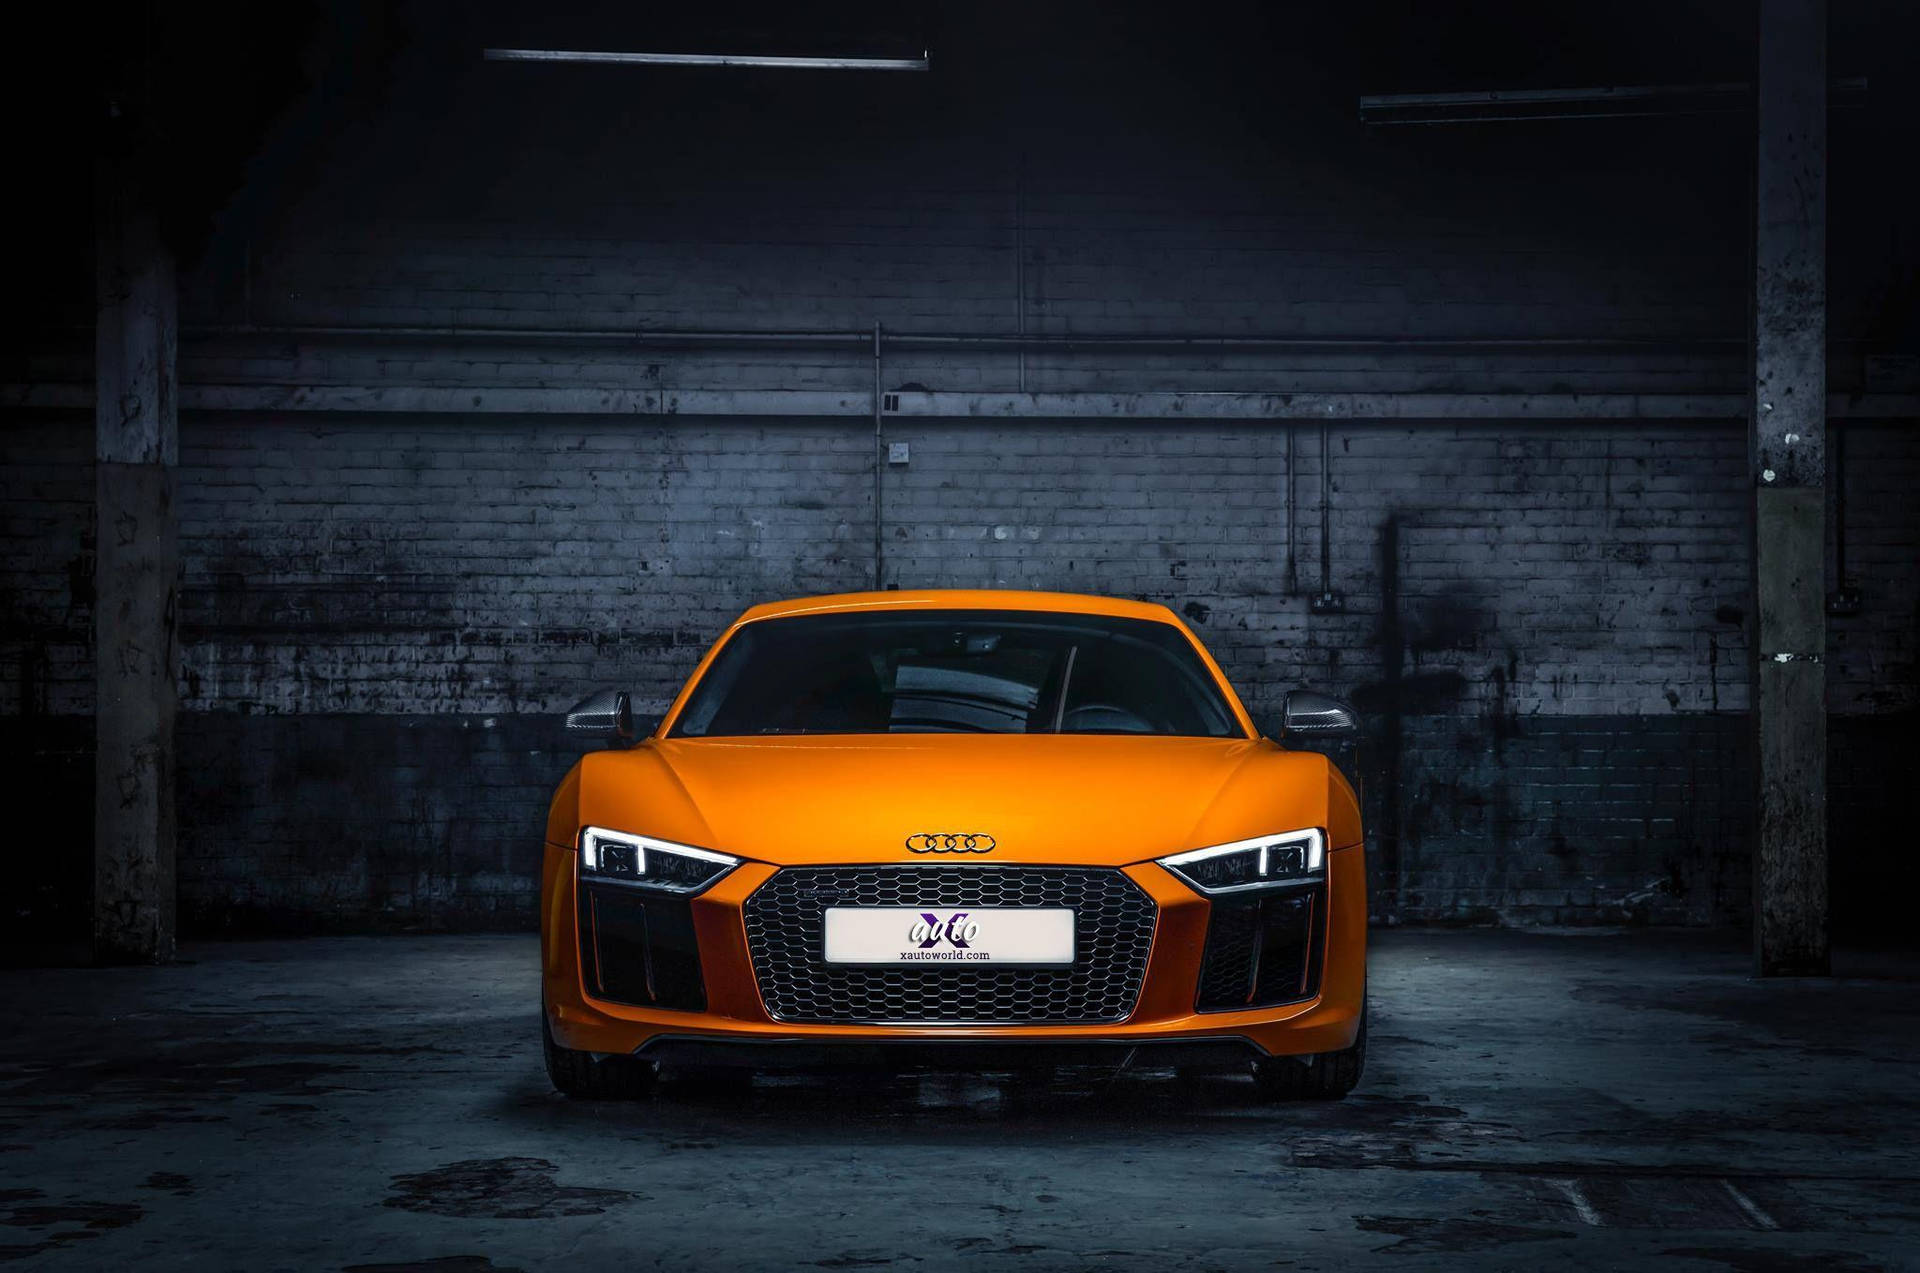 Caption: Dazzling Vegas Yellow Audi R8 In High Definition Background